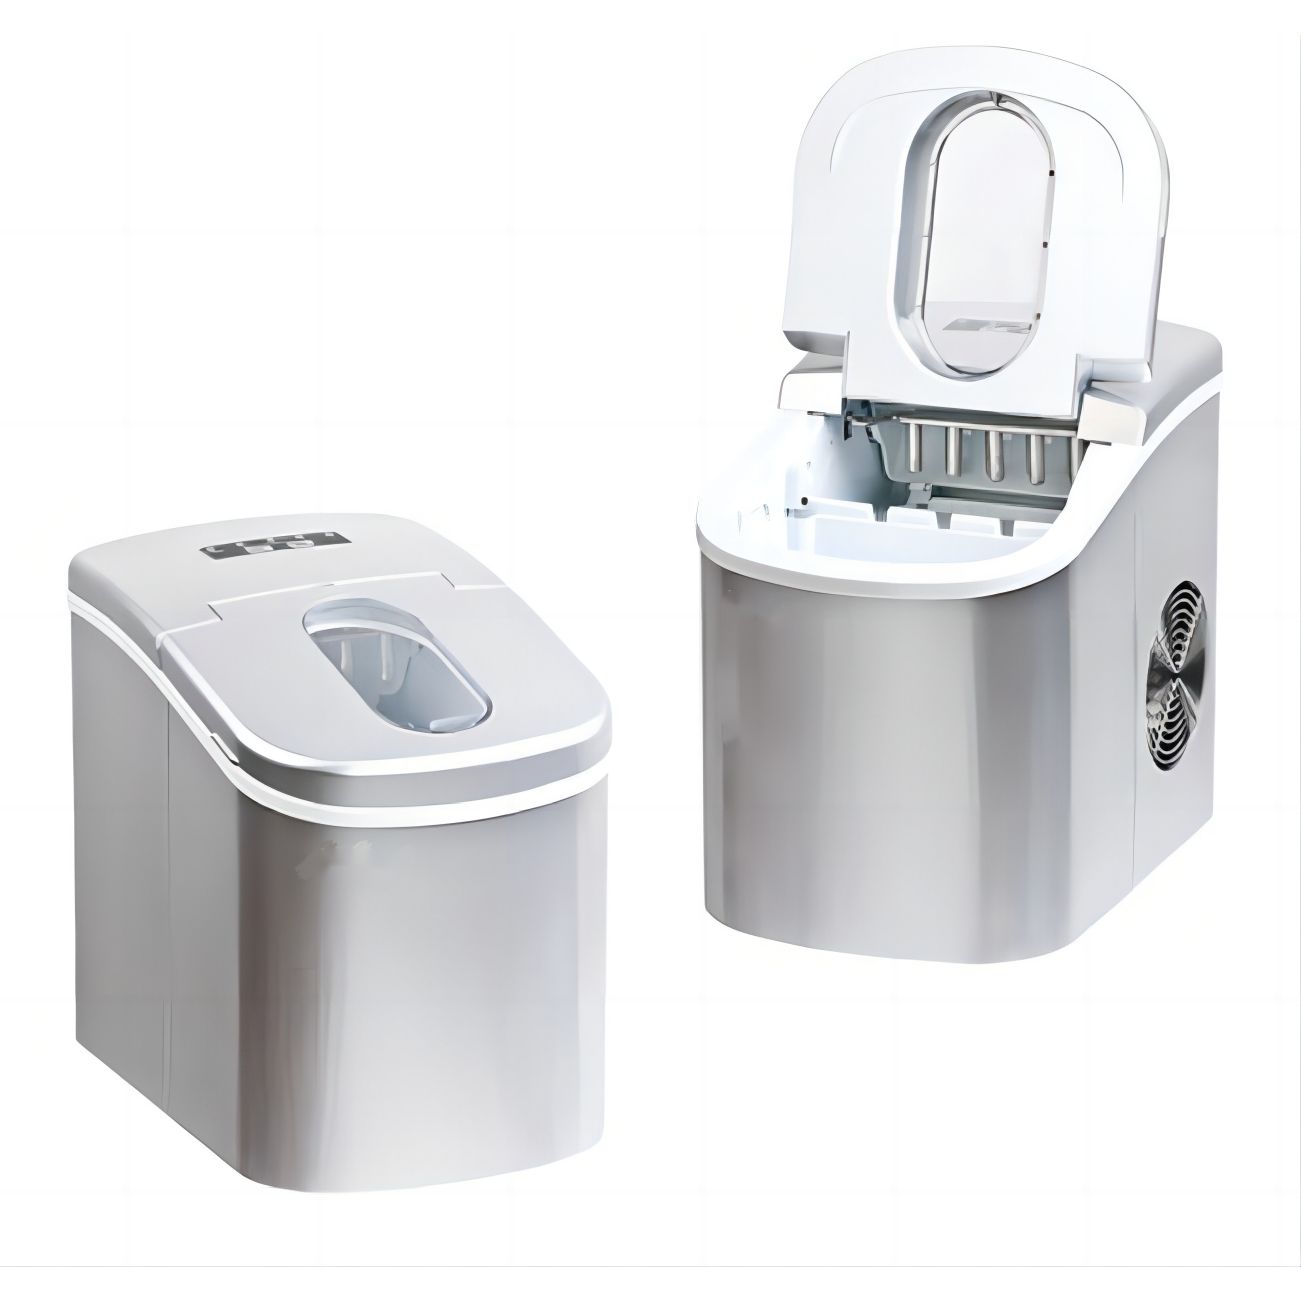 High Efficient Countertop Ice Maker, Bullet Ice Maker with Removable Ice Basket, Multiple Outlook Designs and Color Options Available, OEM/ODM with Customization Services